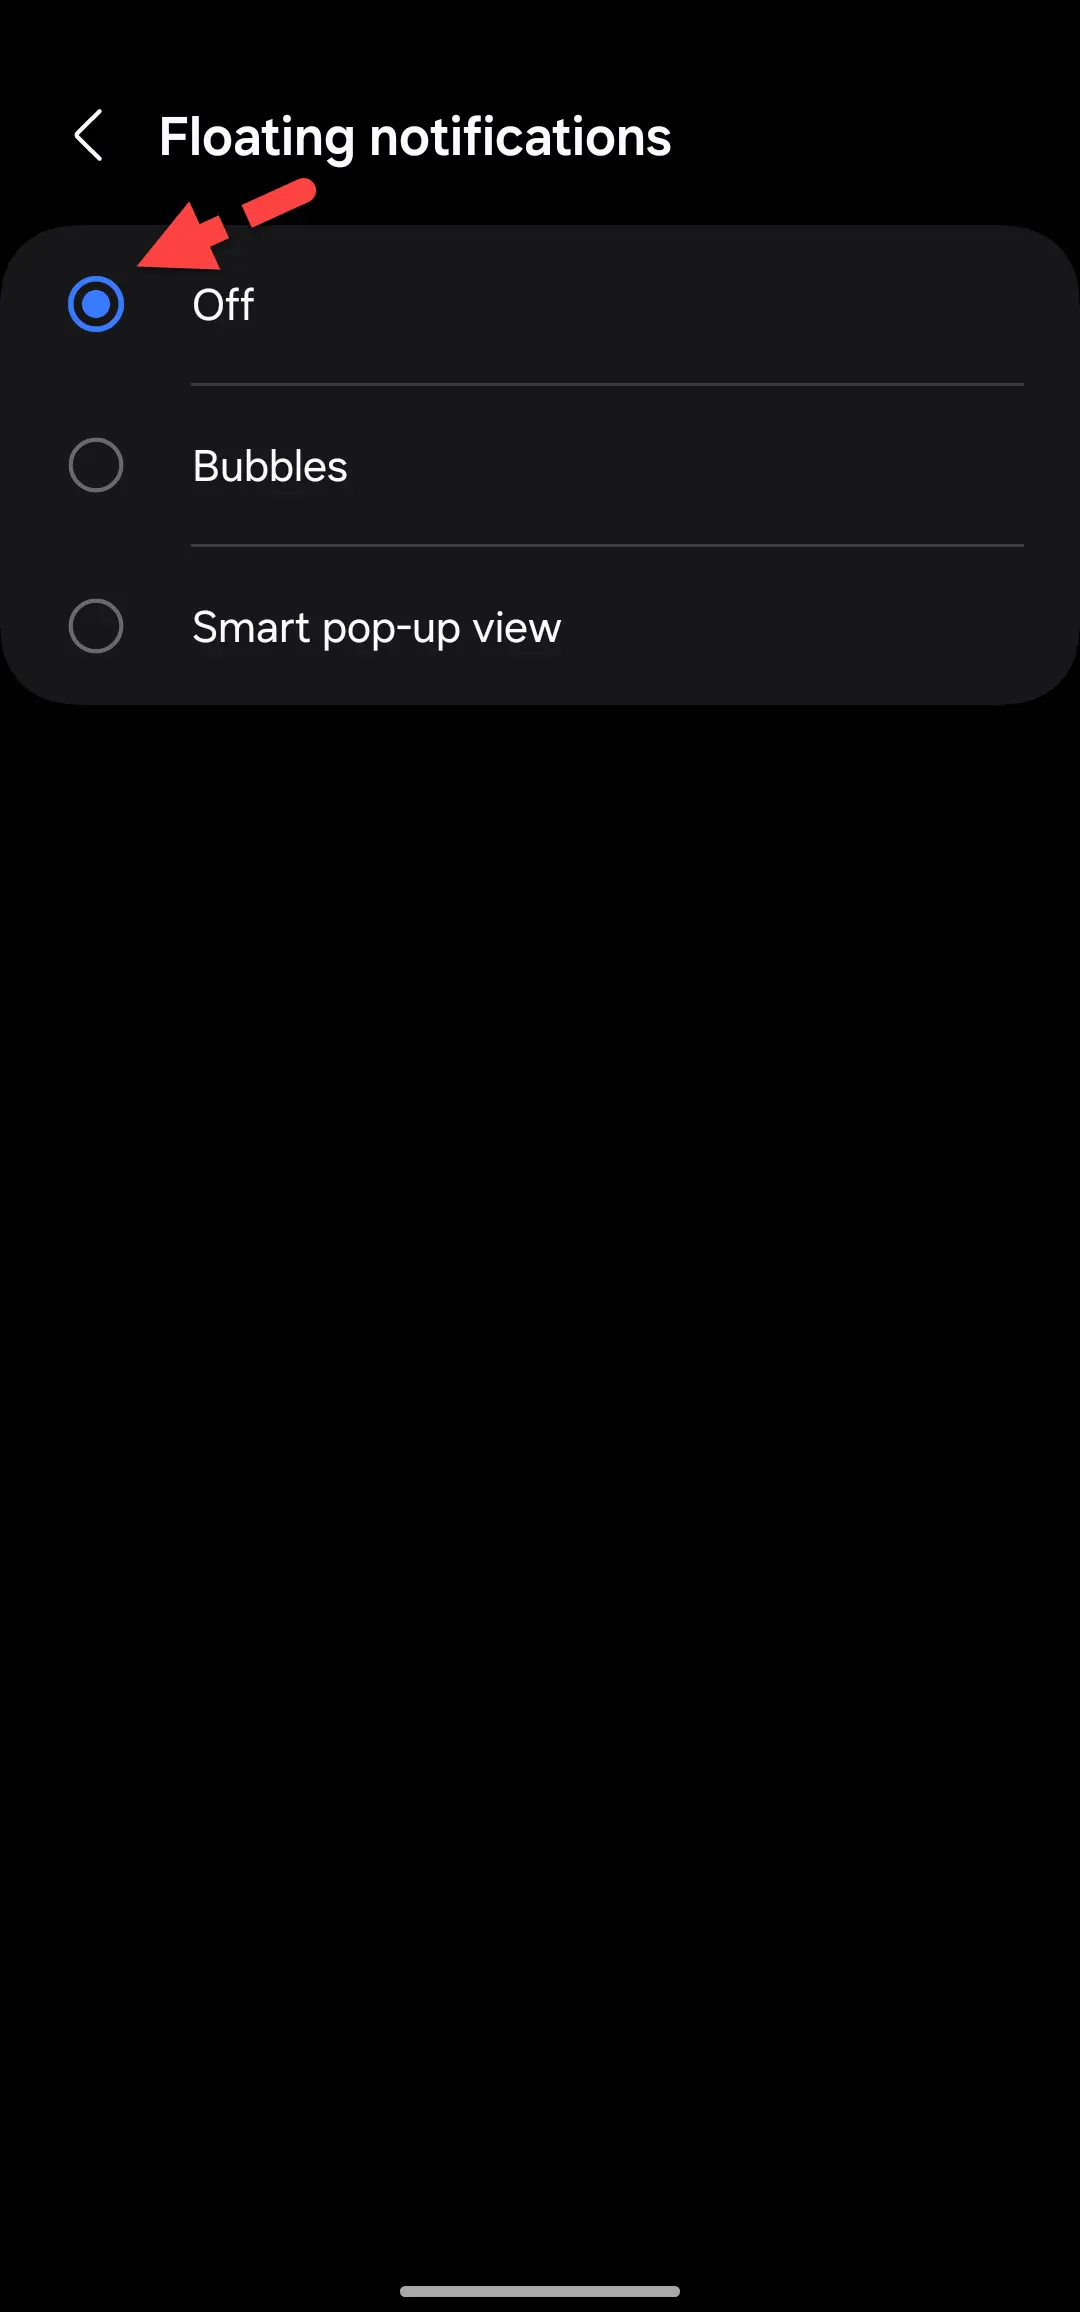 How to Disable Smart Pop-up View